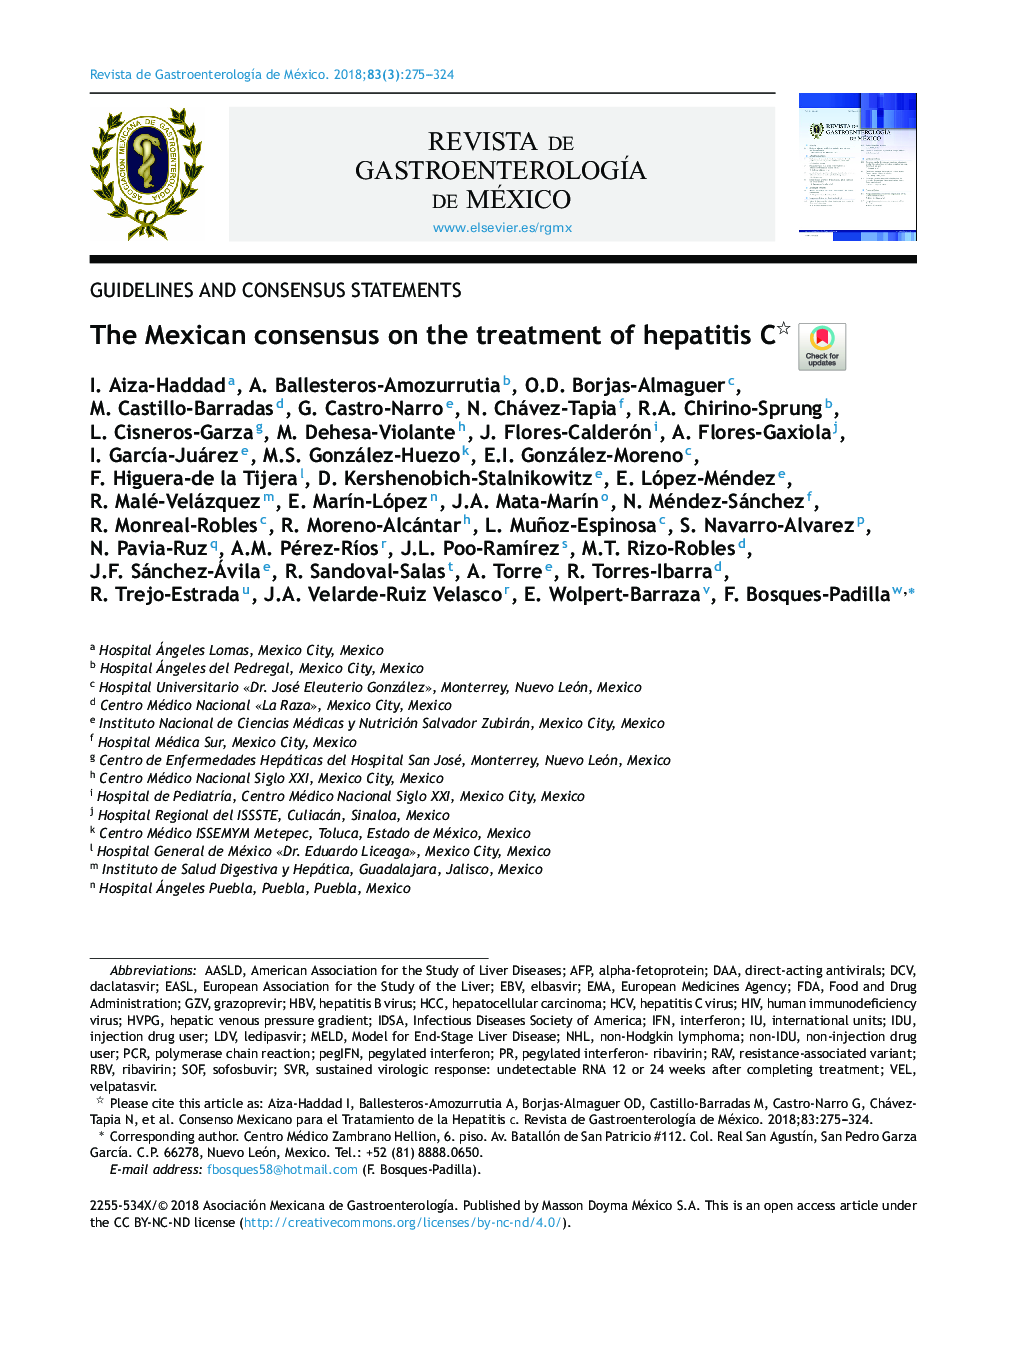 The Mexican consensus on the treatment of hepatitis C